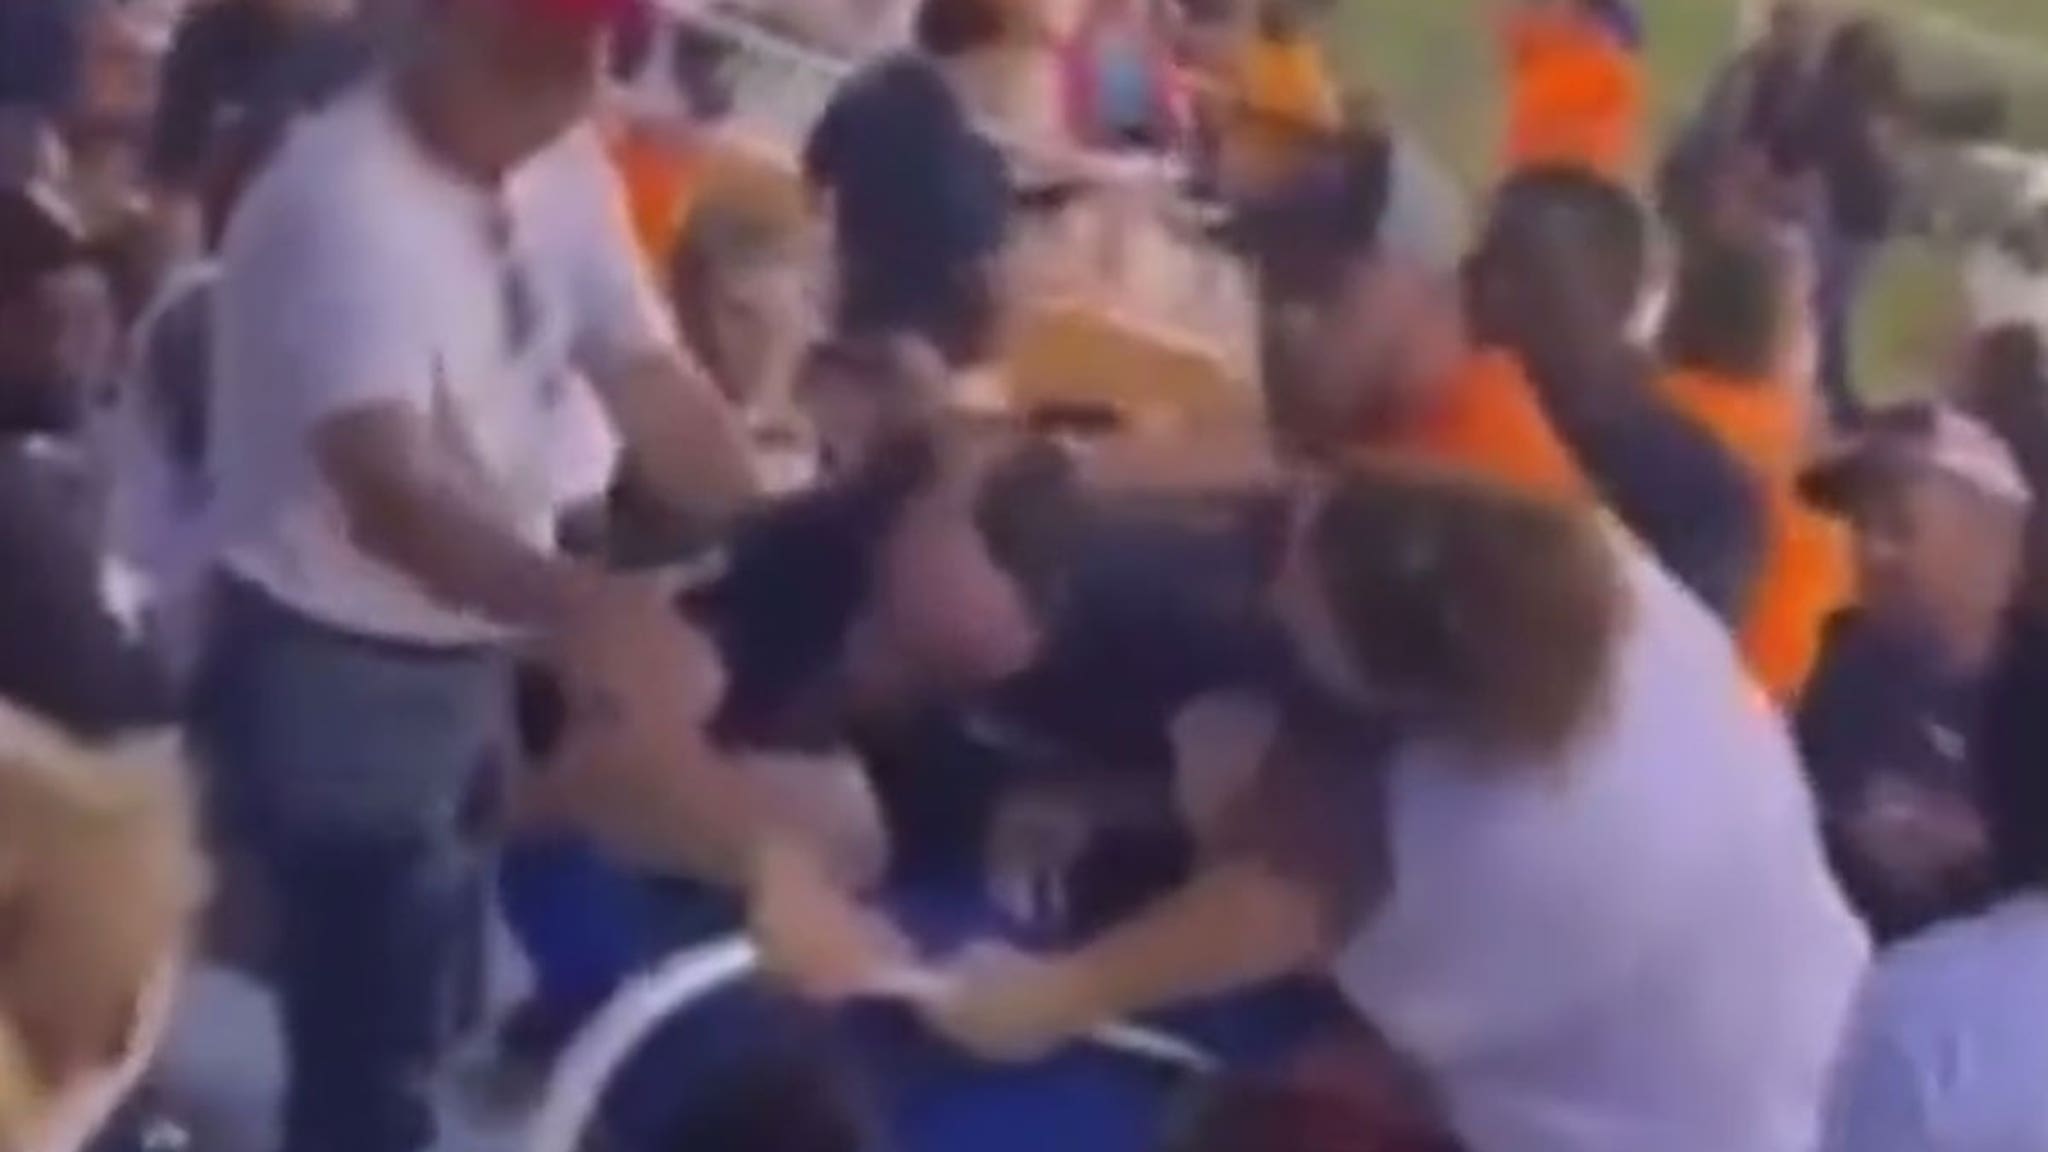 Wild Fight Breaks Out At Mississippi H.S. Football Game, Man Left Bloodied